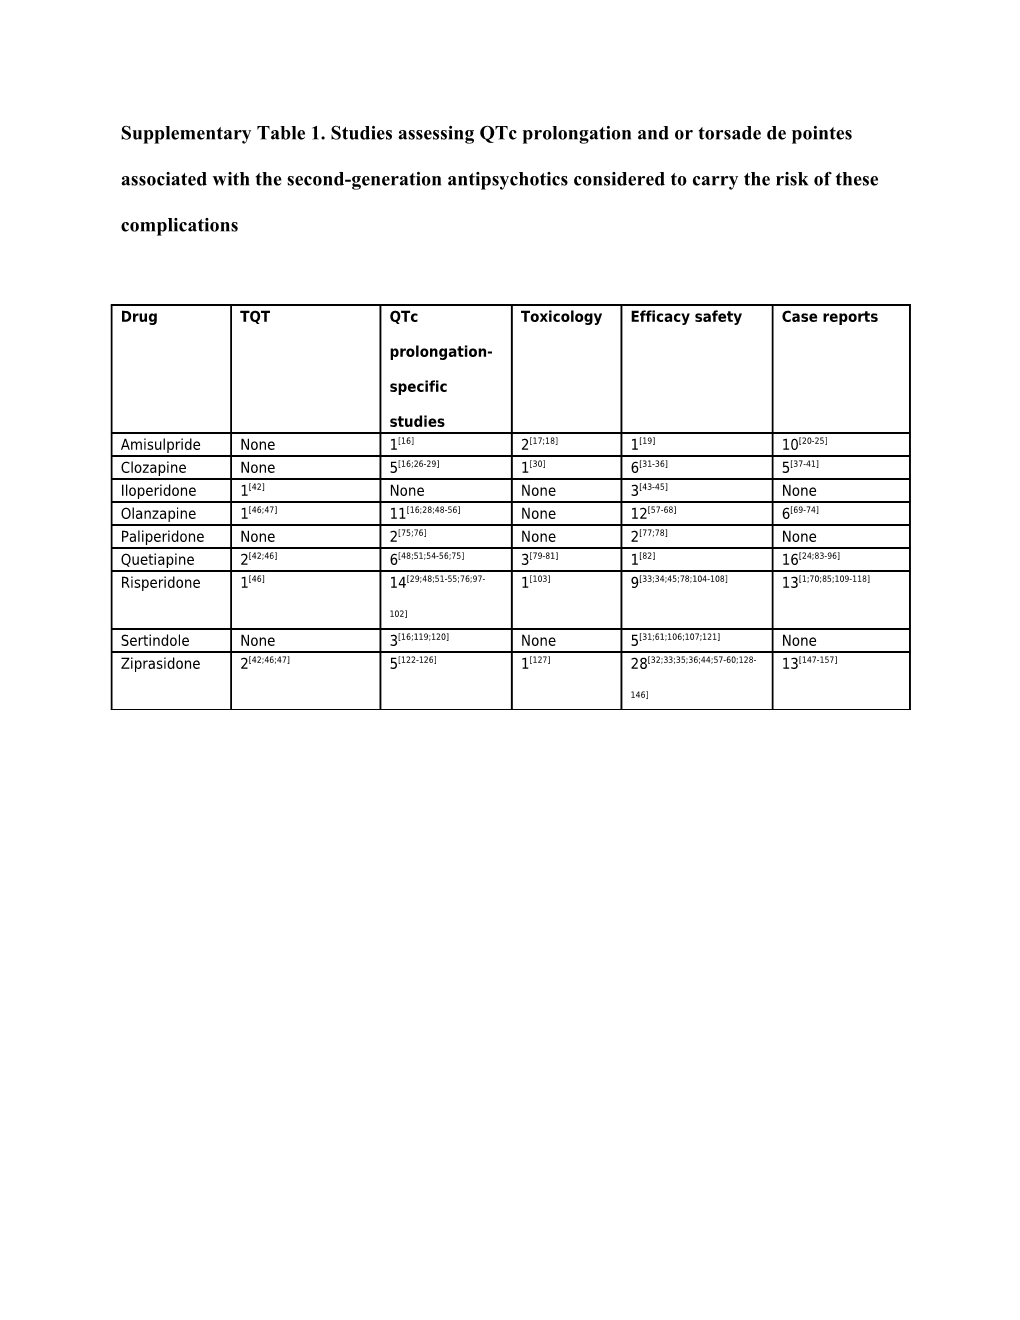 Supplementary Table 1.Studies Assessing Qtc Prolongation and Or Torsade De Pointes Associated